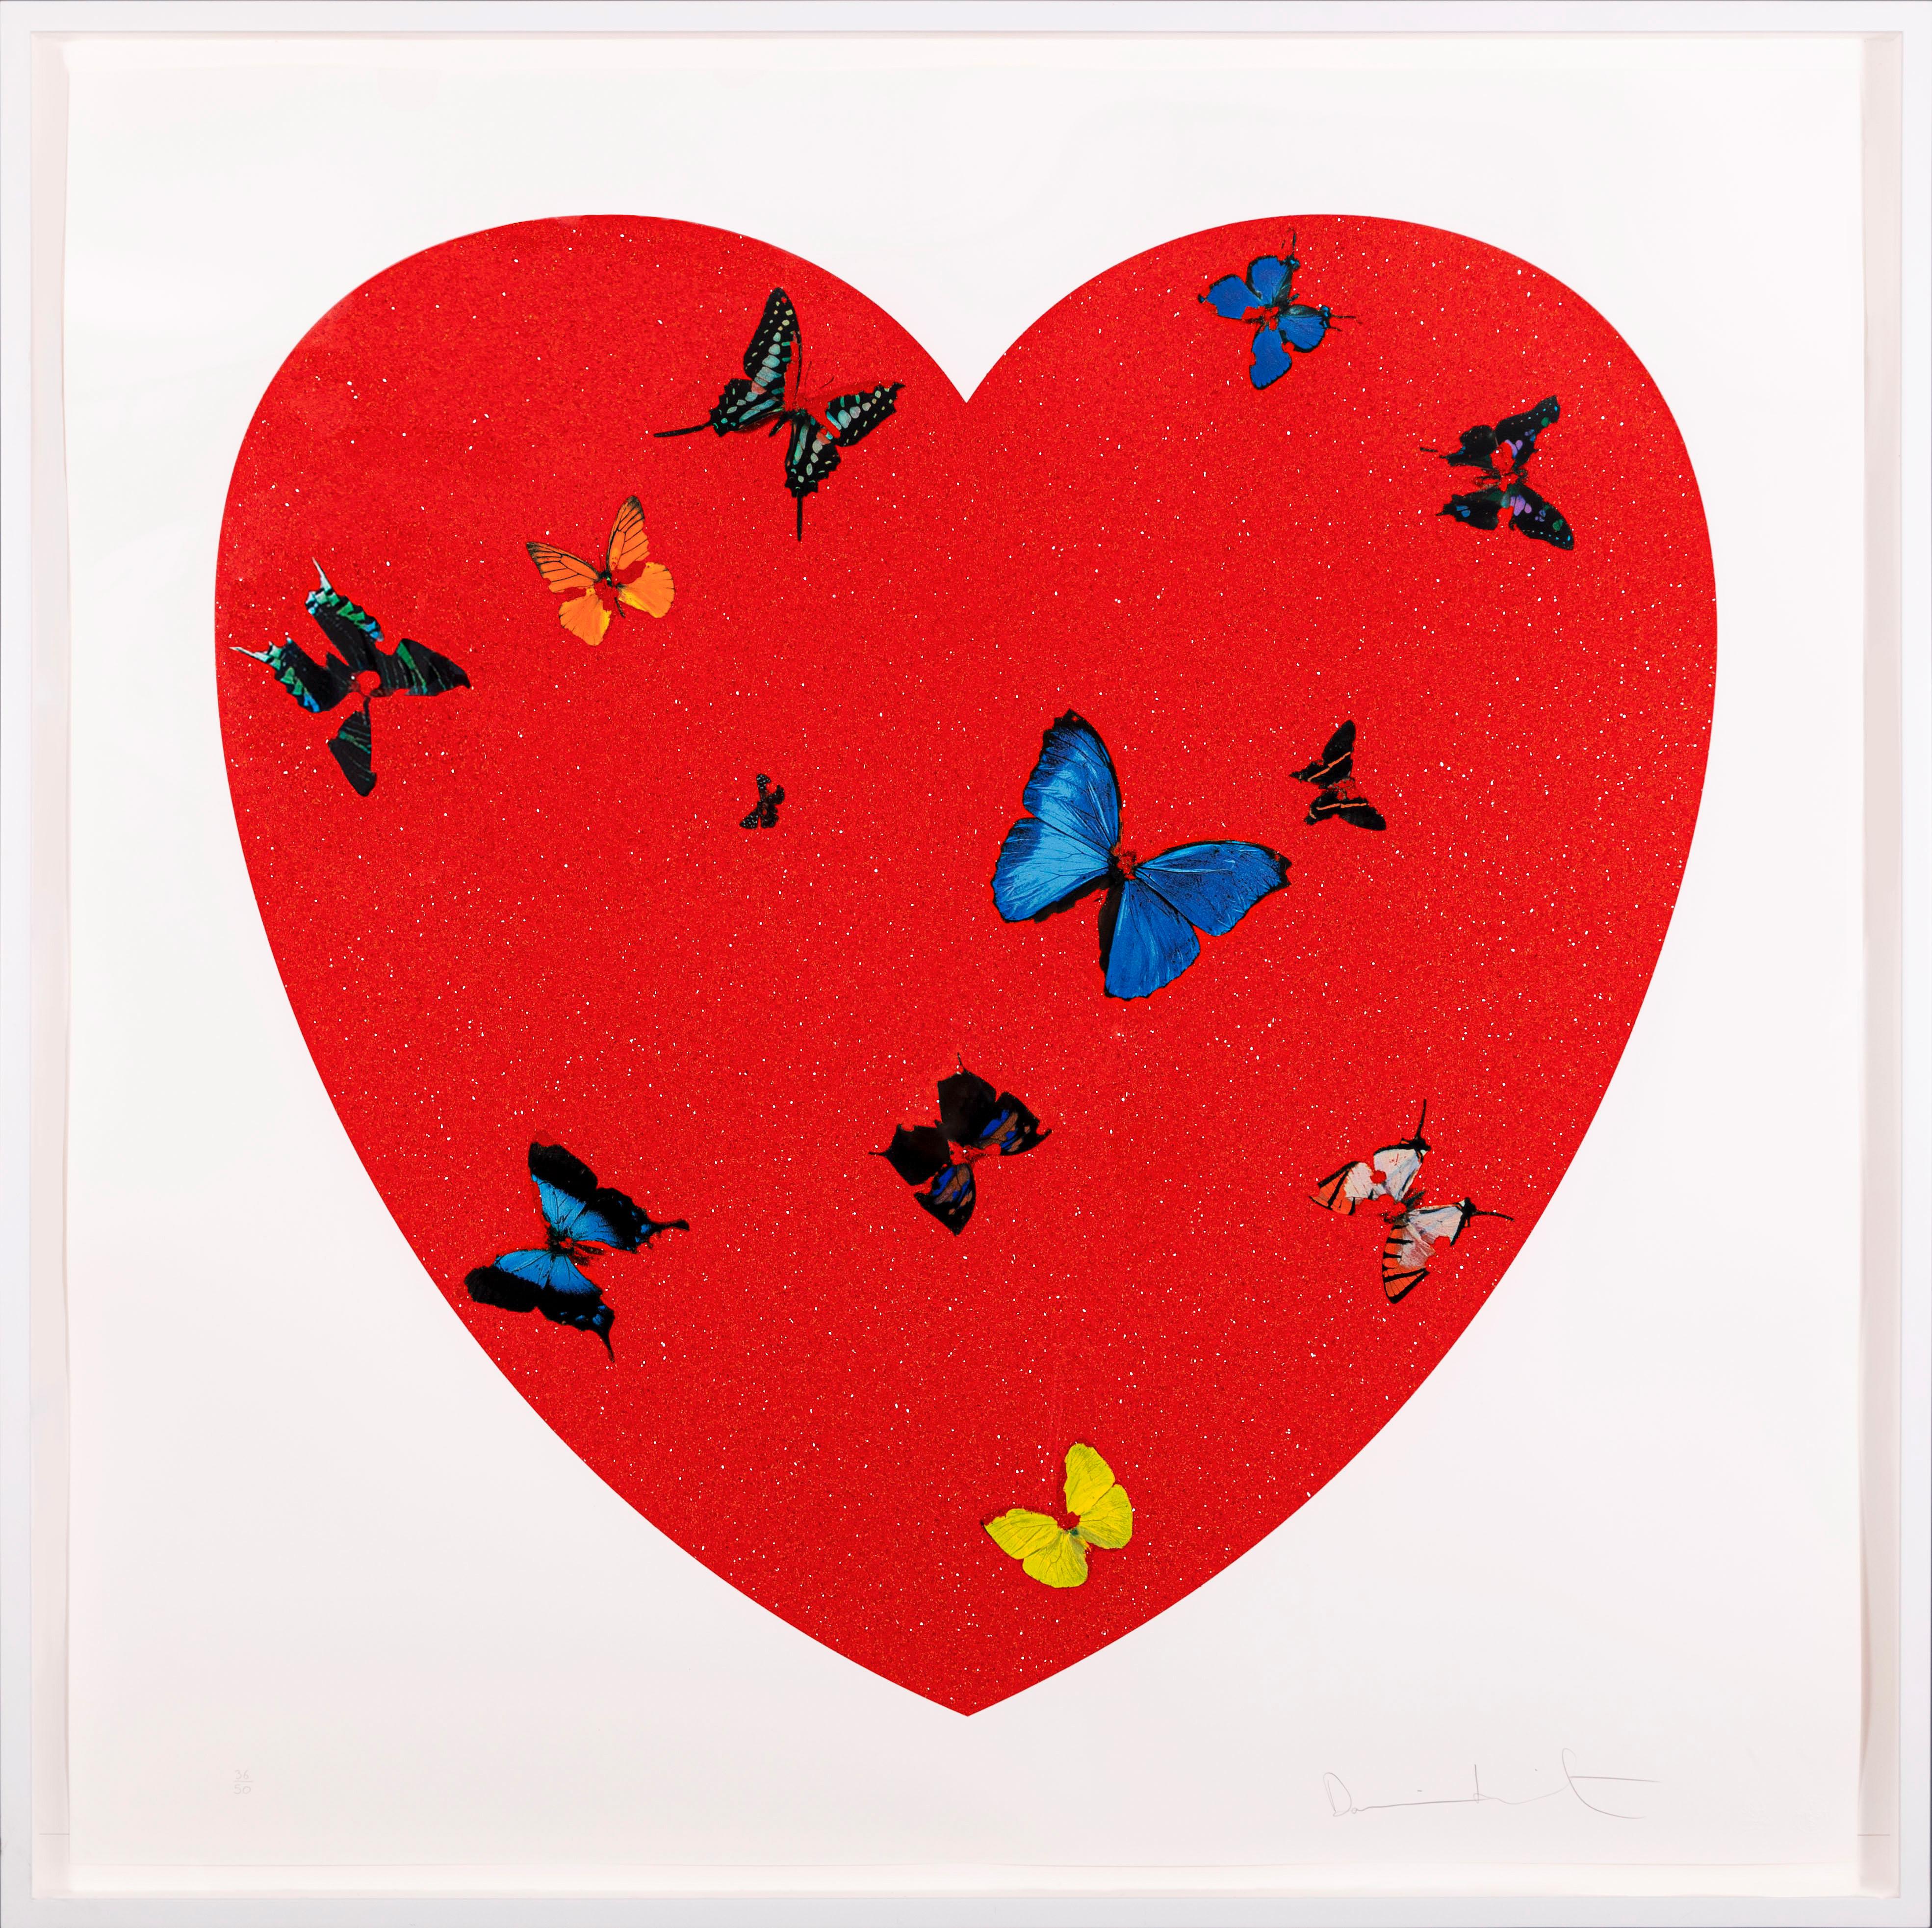 The ‘All You Need Is Love, Love, Love’ butterfly heart with diamond dust by contemporary master artist, Damien Hirst, was created in 2010. It is signed and numbered by the Artist and stamped by the publisher. Published by Other Criteria, London.